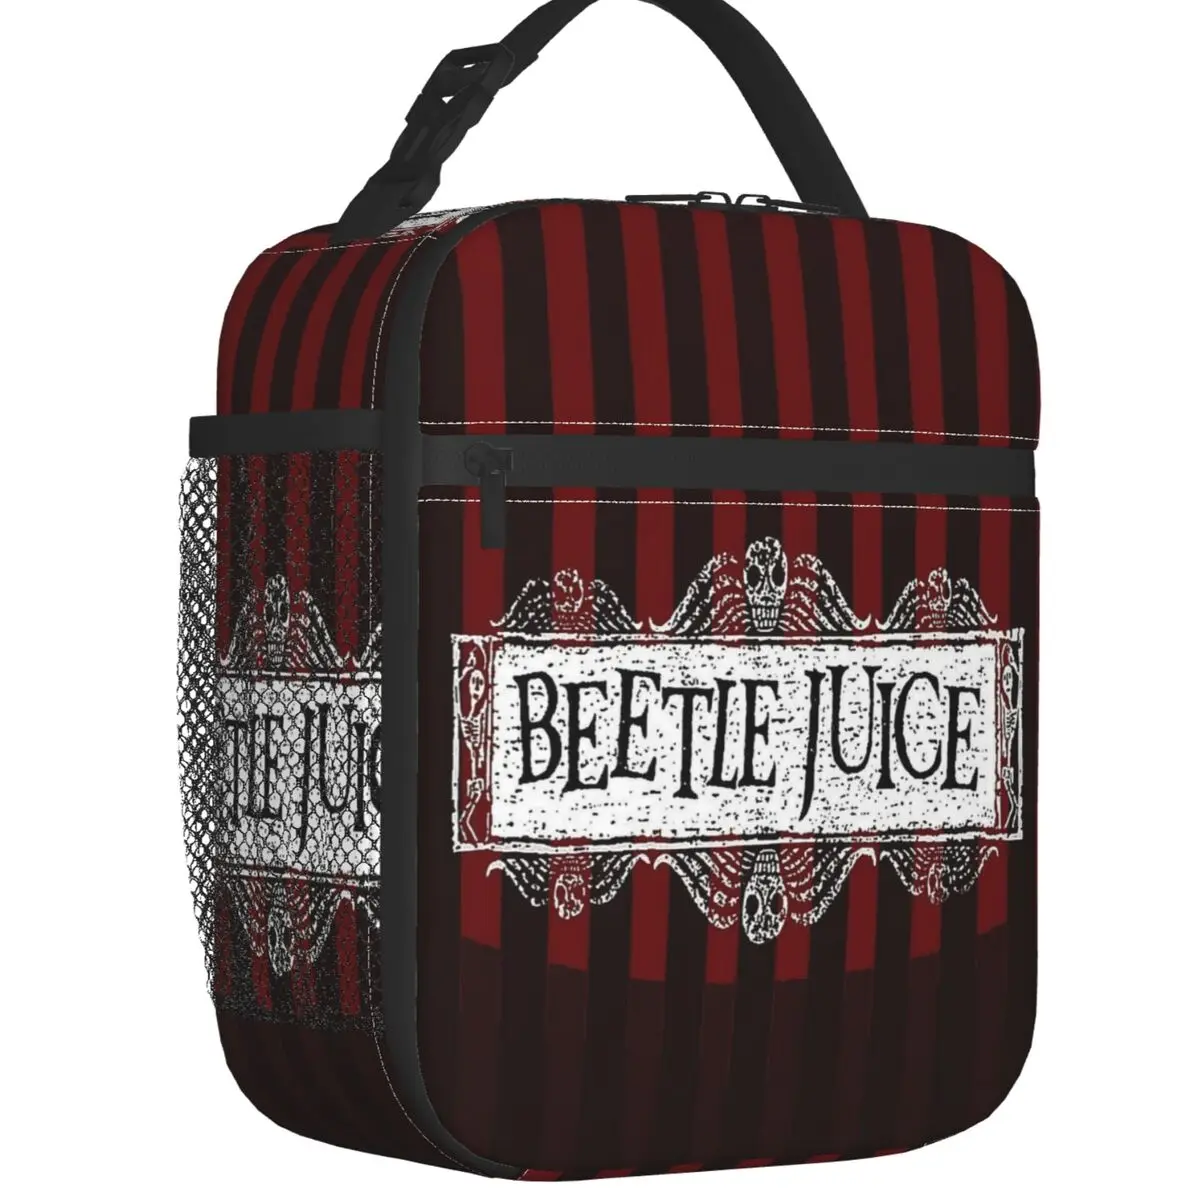 Custom Tim Burton Beetlejuice Lunch Bag Men Women Cooler Thermal Insulated Lunch Box for Adult Office